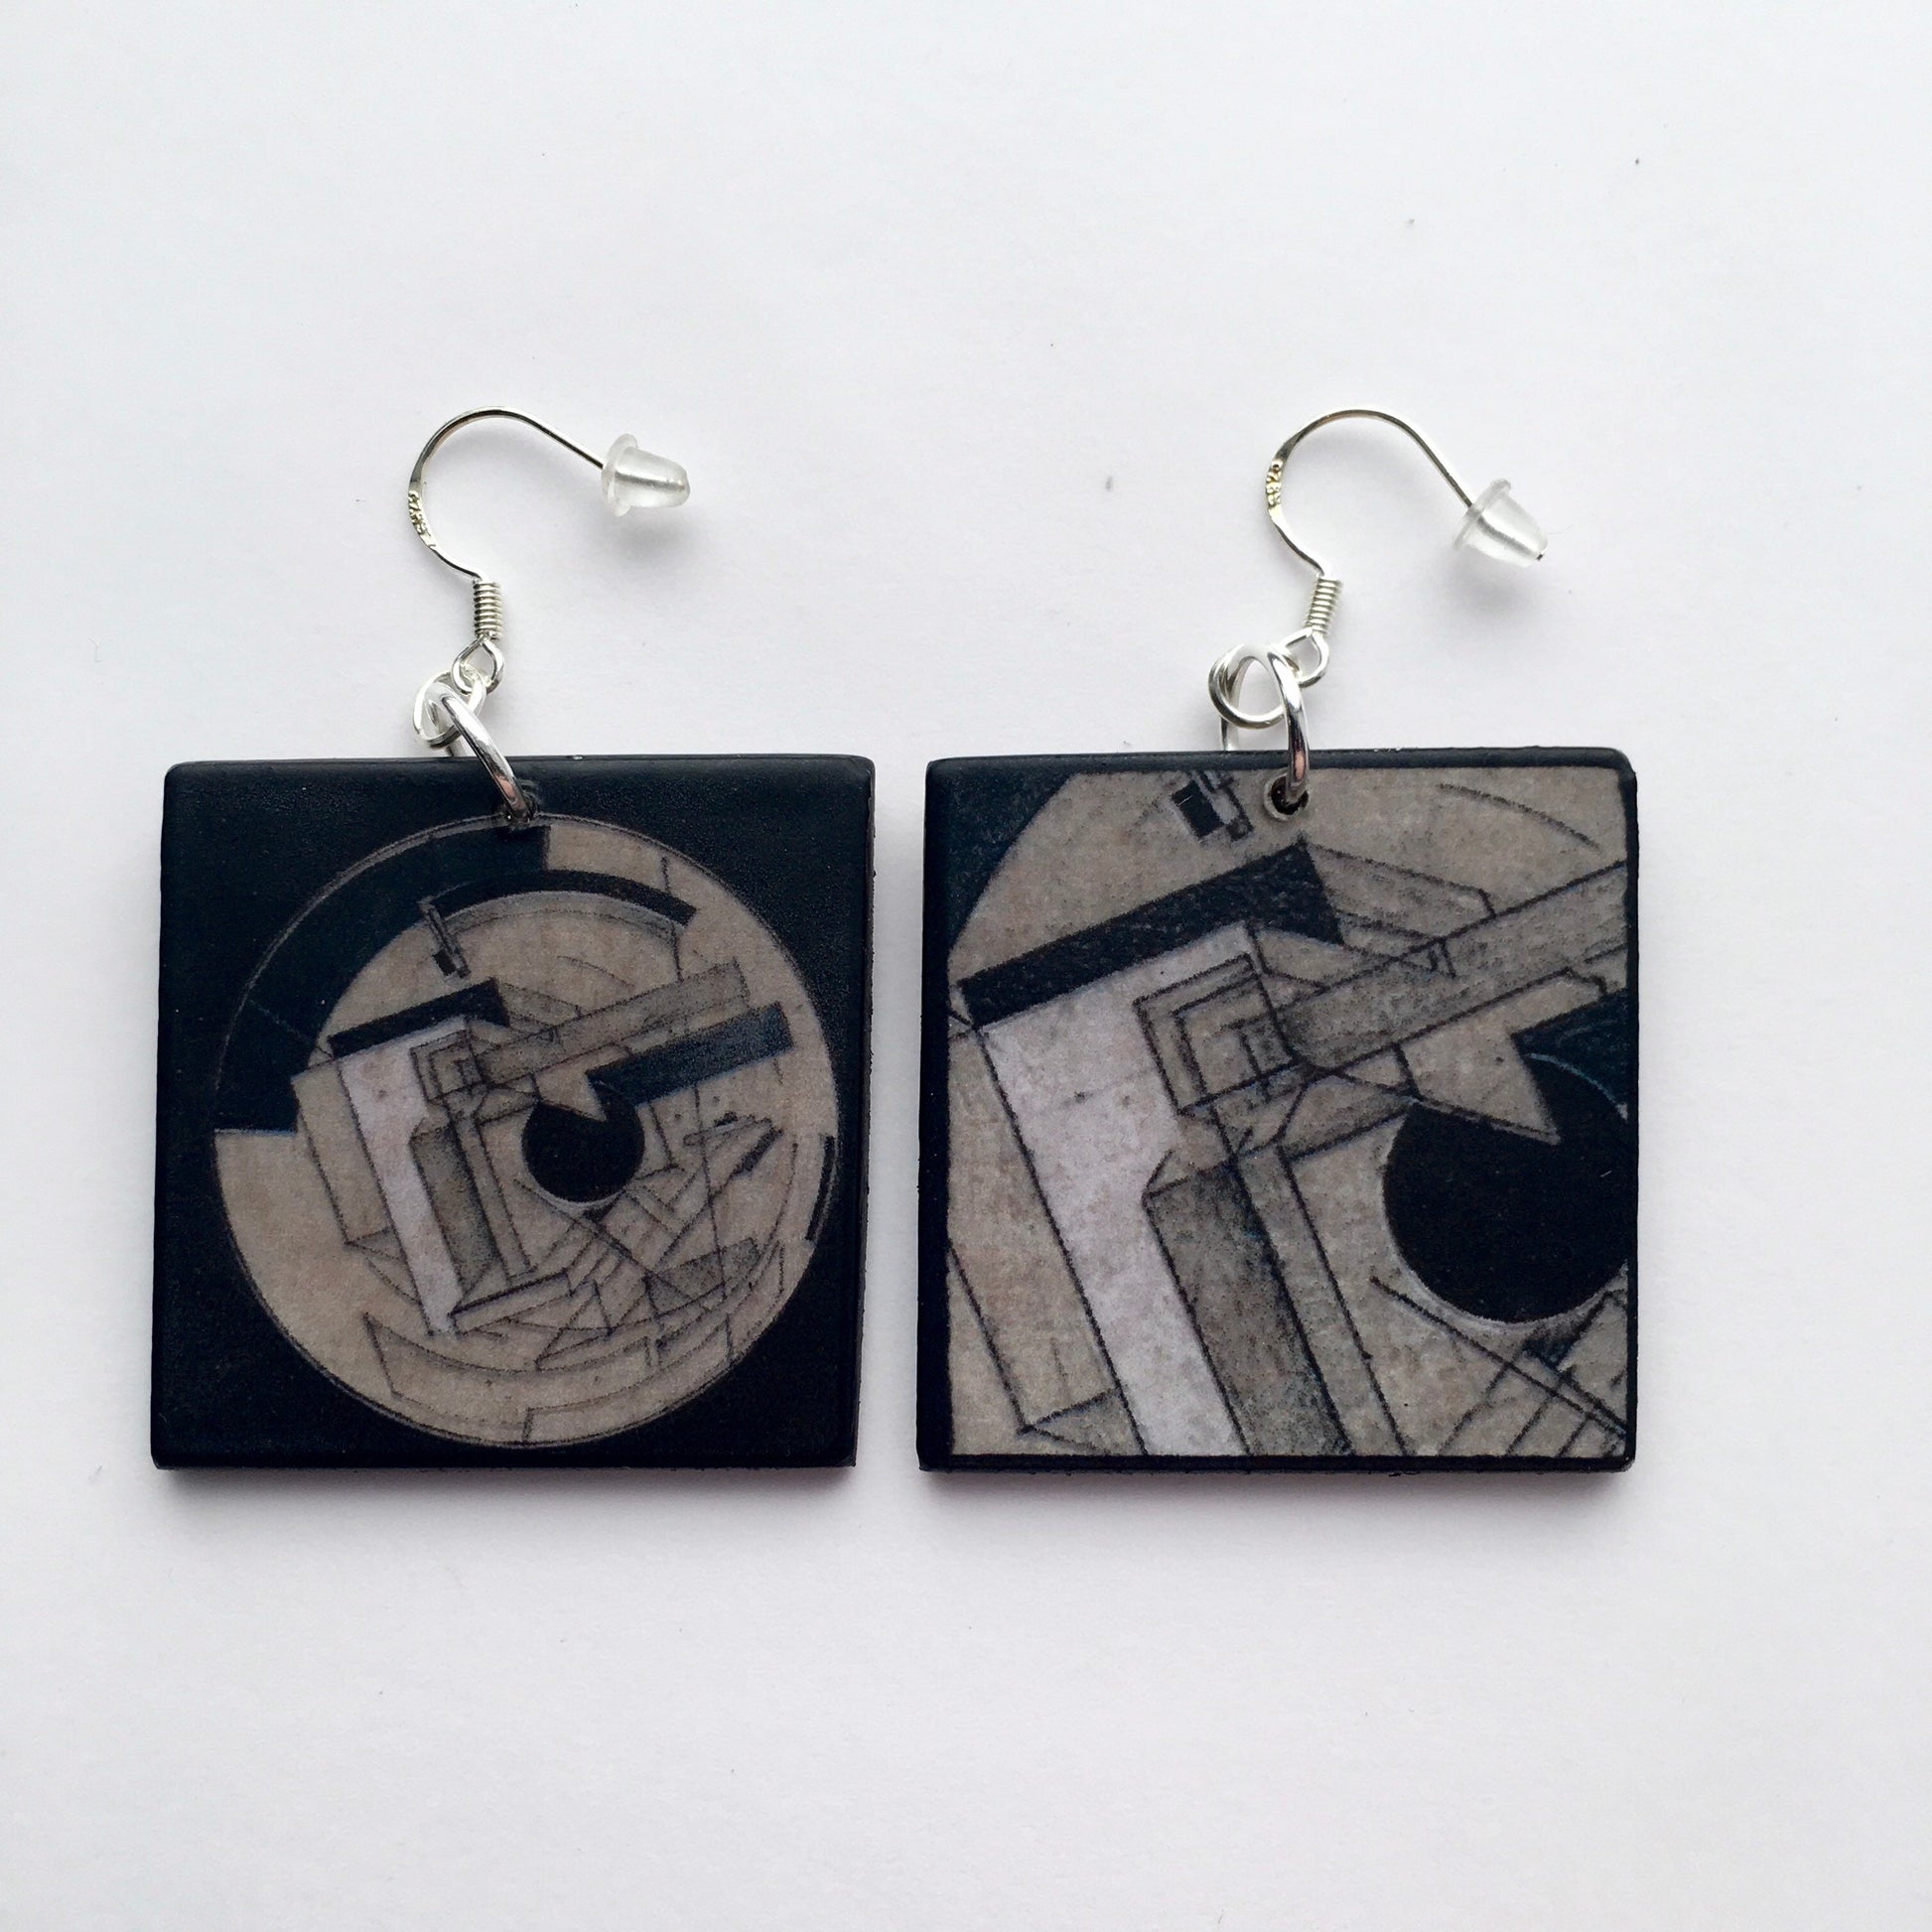 El Lissitzky, geometric, abstract art earrings in sustainable wood and sterling silver 925. Architectonic art gift for her.